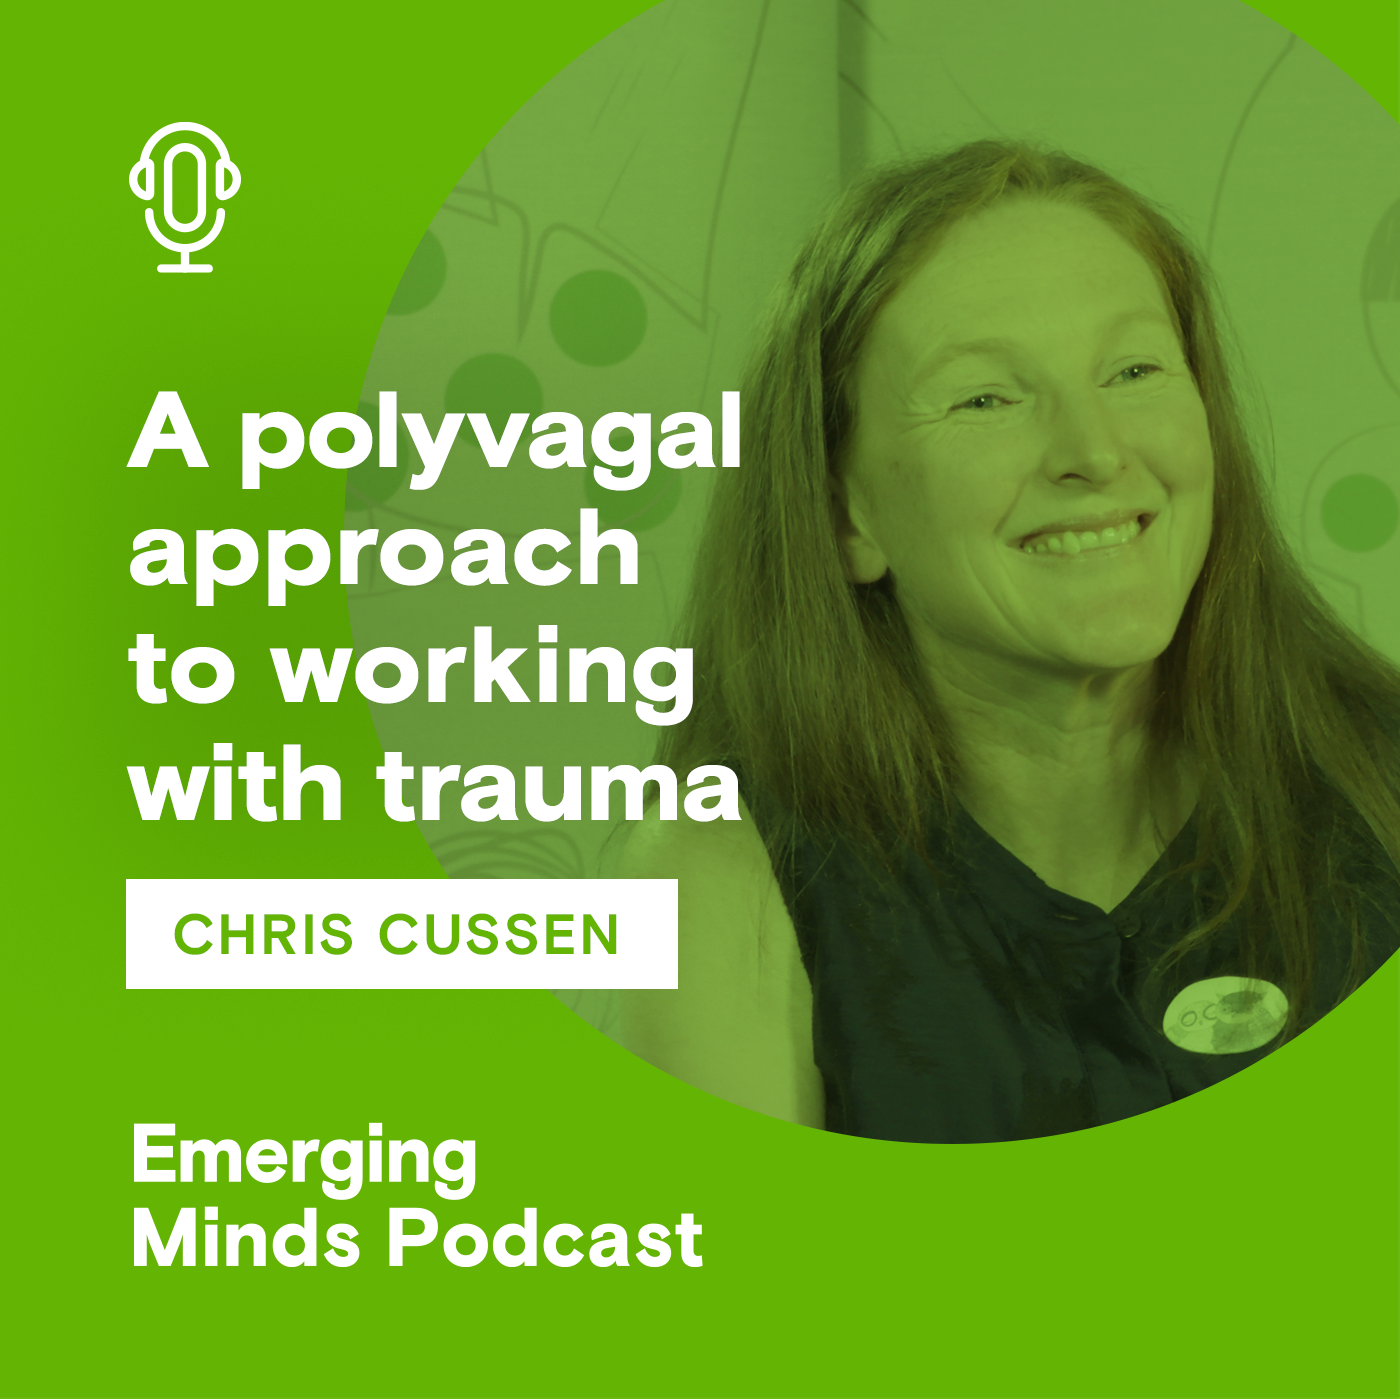 A polyvagal approach to working with trauma